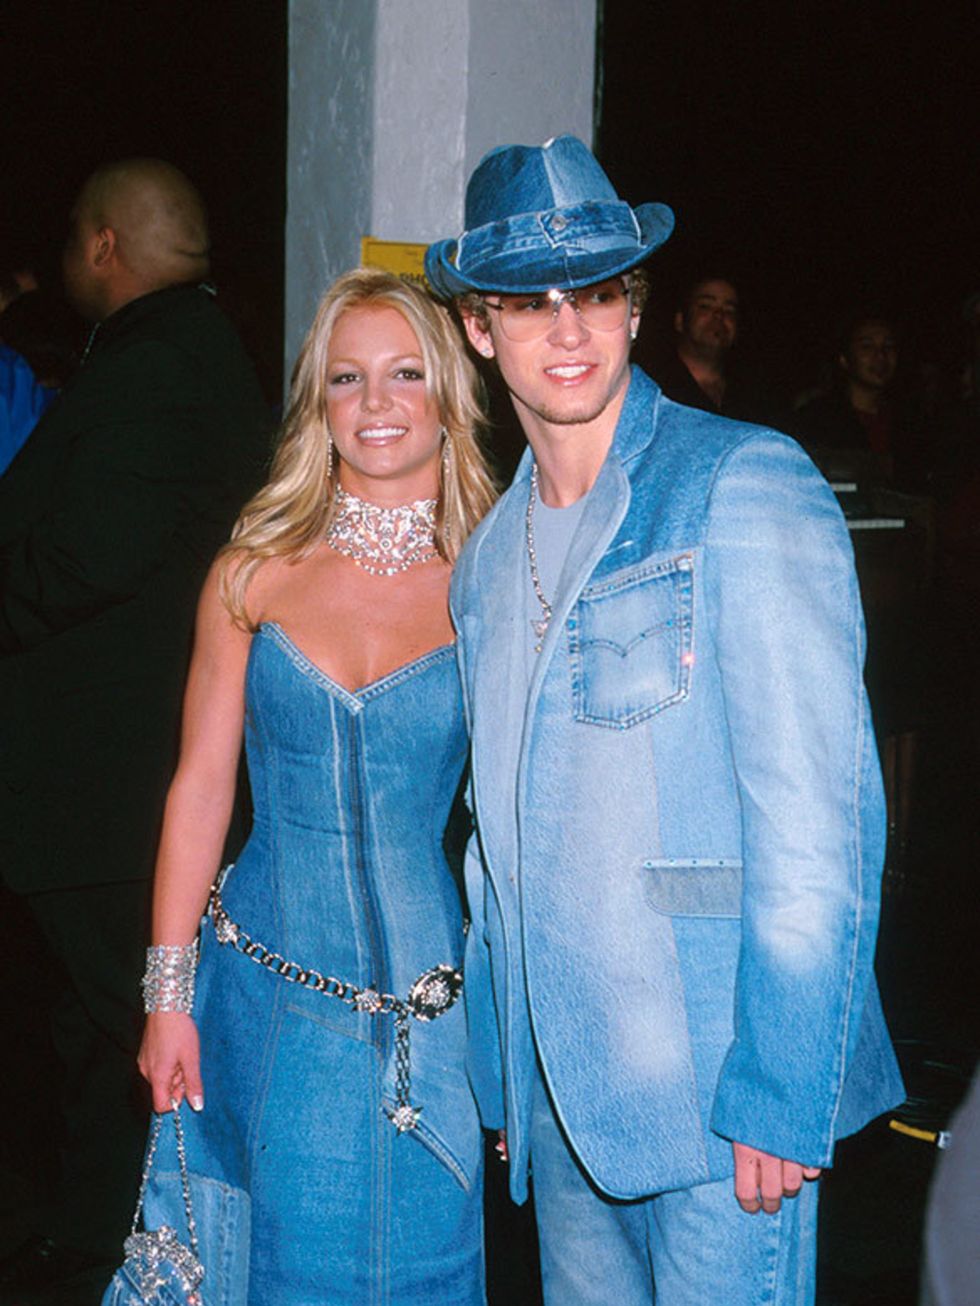 Justin Timberlake and Britney Spears at the American Music Awards, 2001